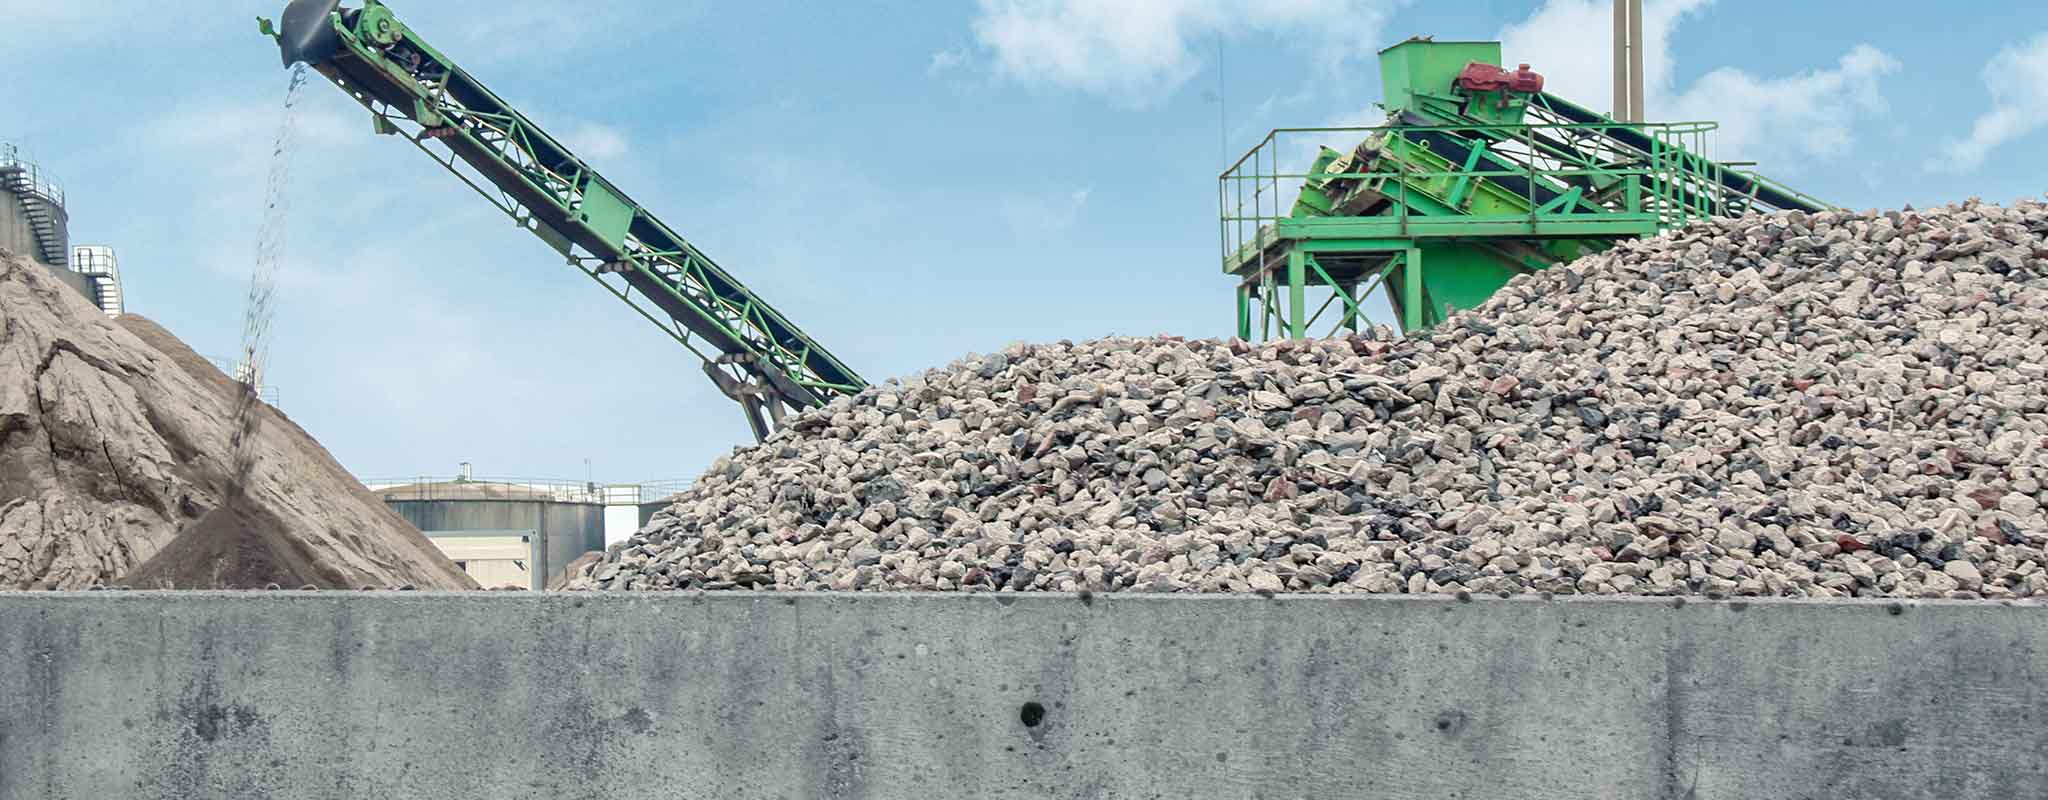 Recycled aggregates: production plant overview